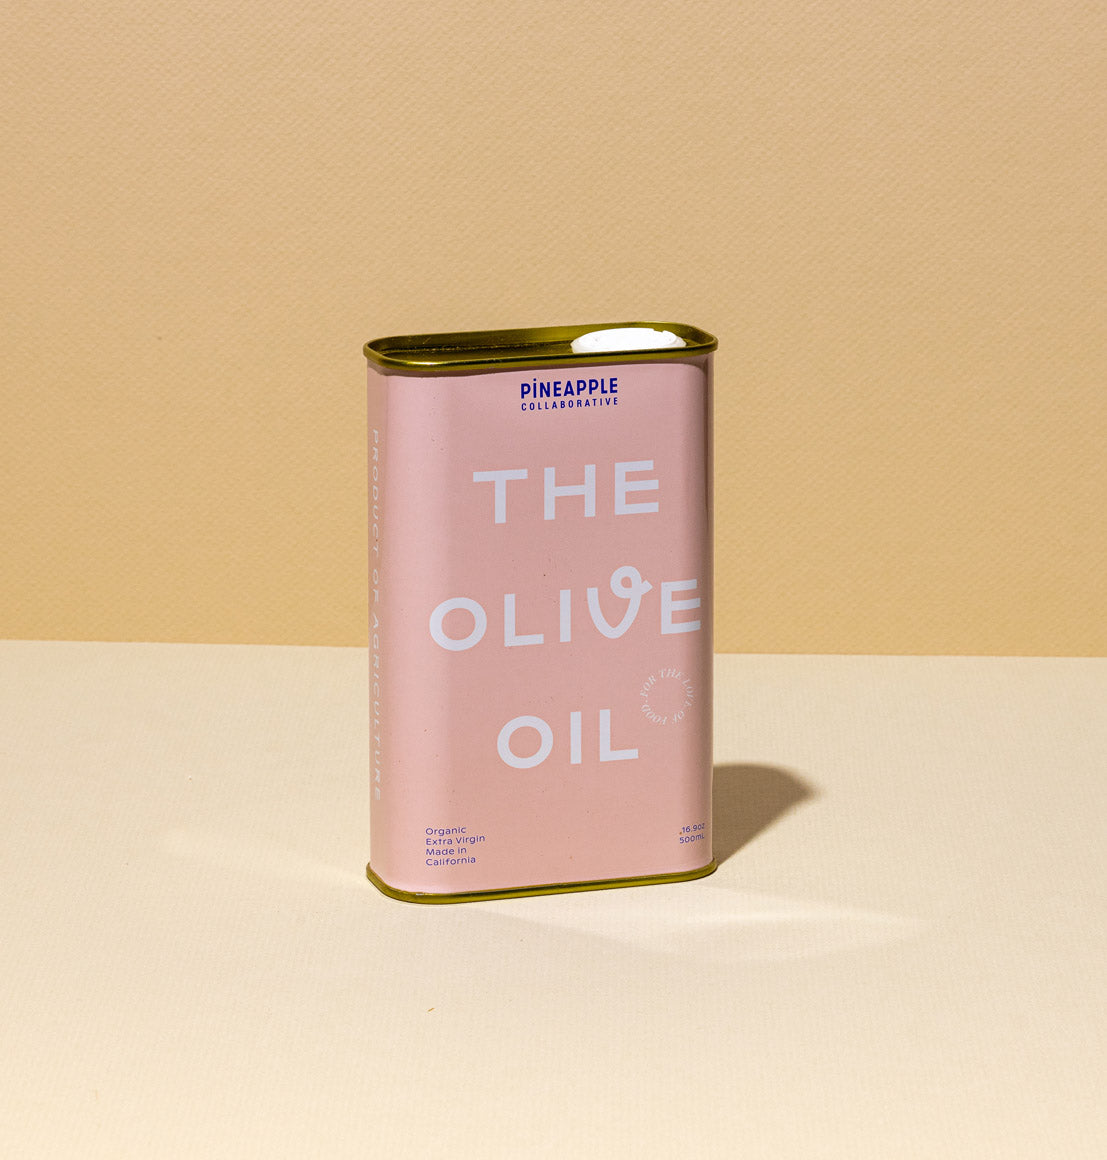 Pineapple Collaborative Pink Olive Oil Tin